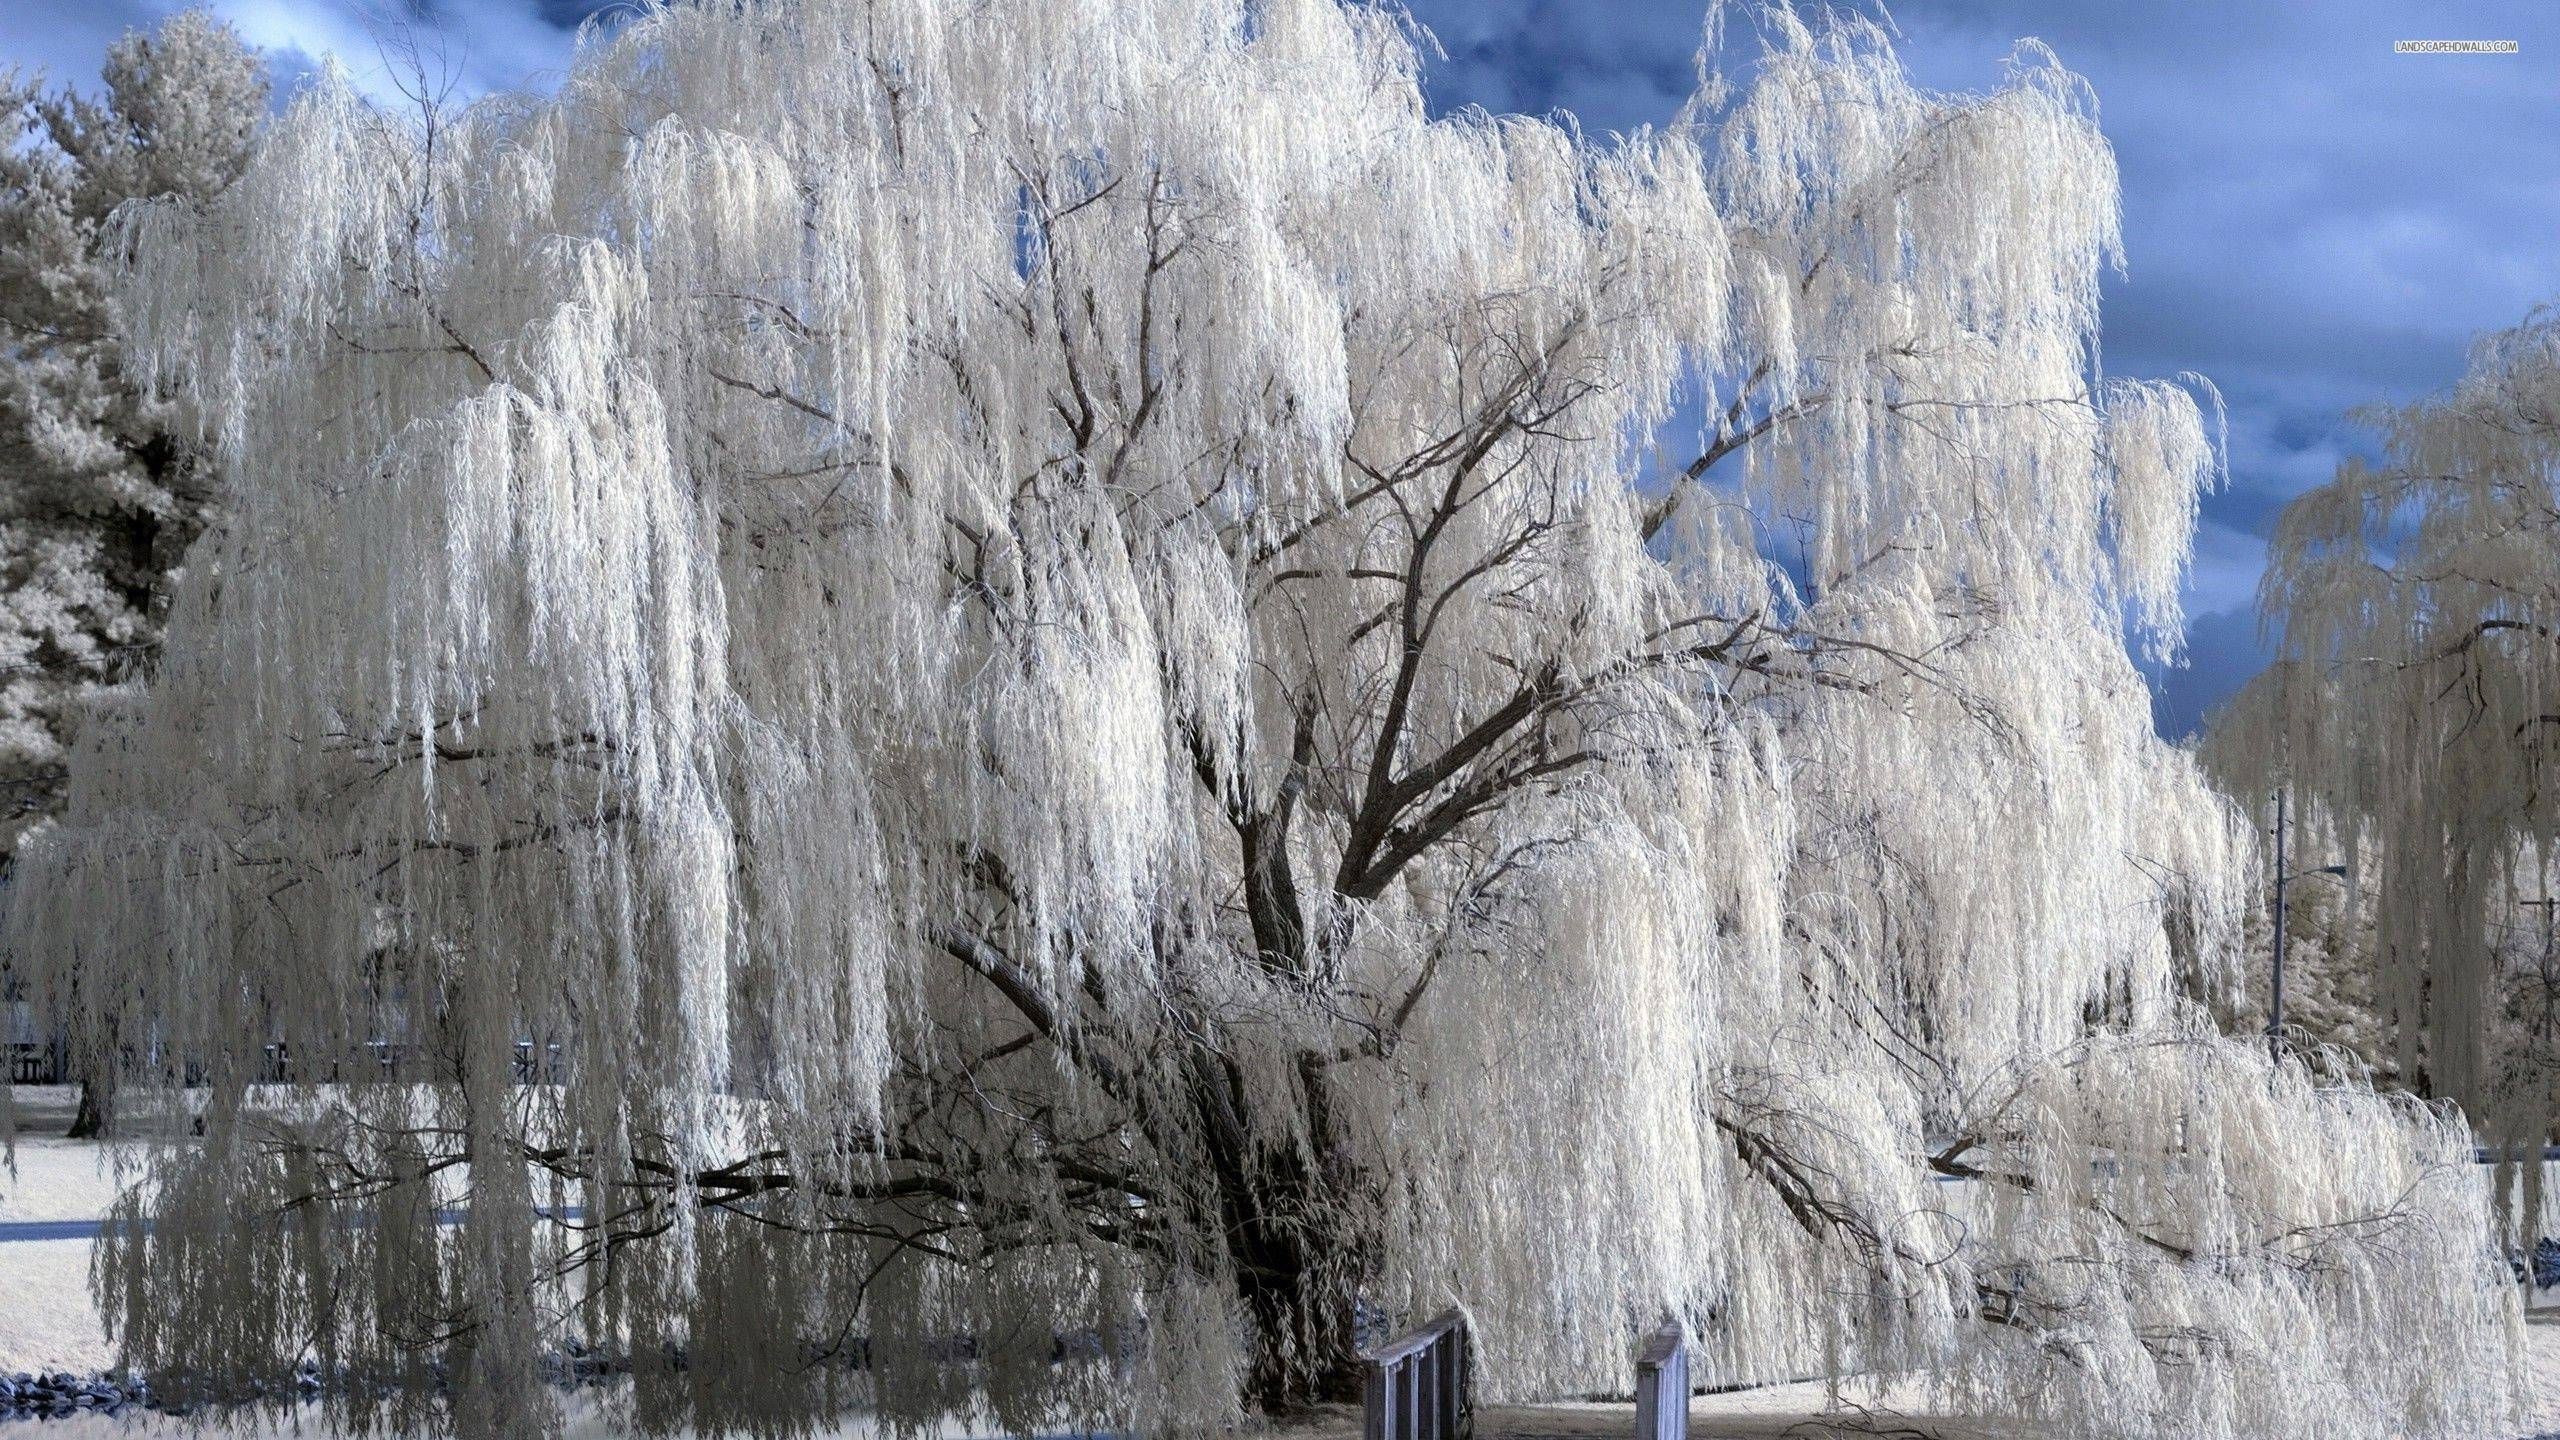 2560x1440 Snowy weeping willow wallpaper #